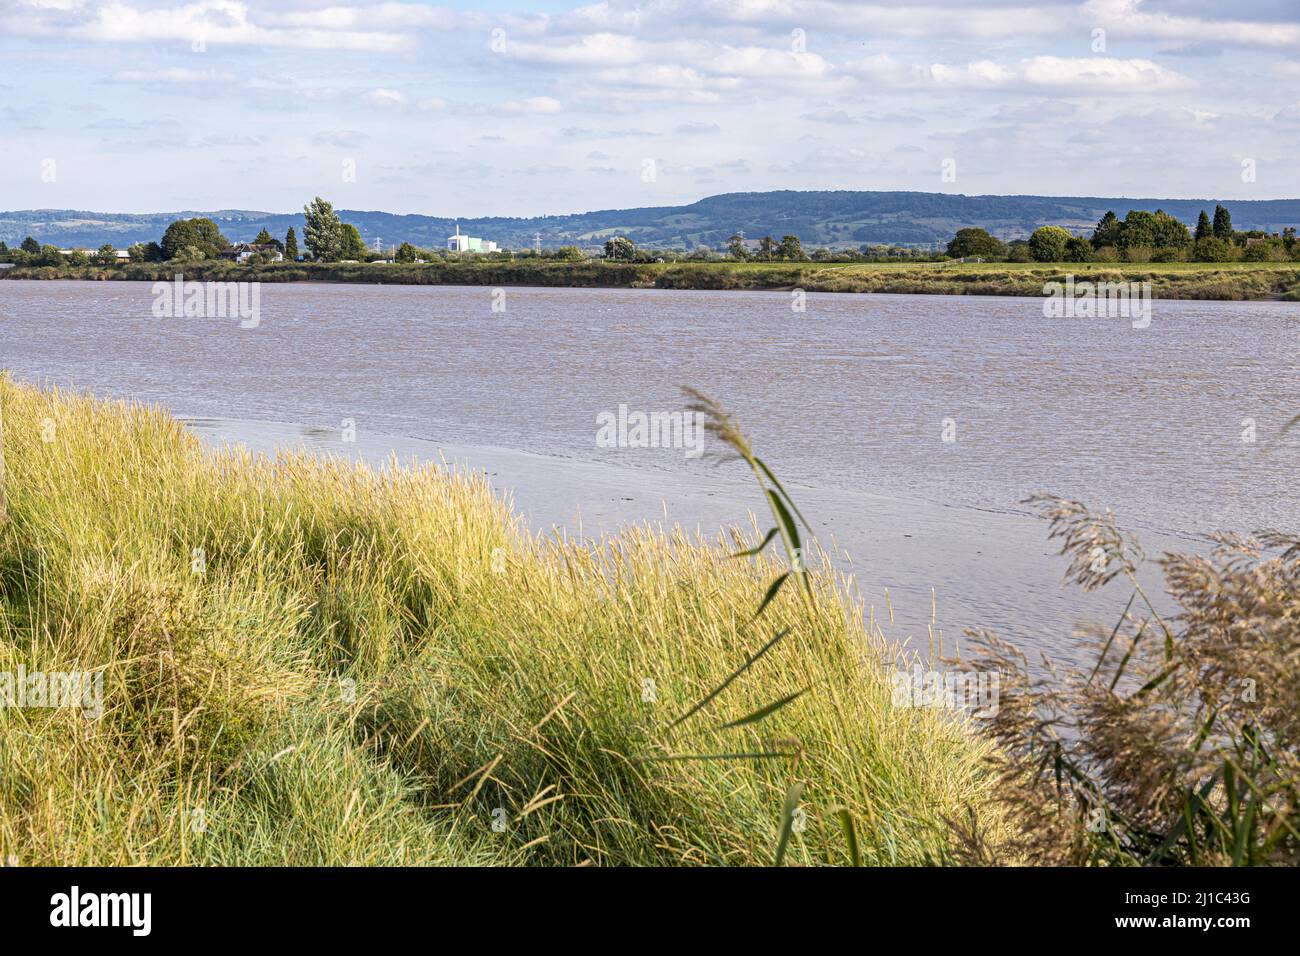 Looking across the River Severn taking in the view of the Javelin Park Energy from Waste Facility in the Severn Vale from Rodley, Gloucestershire, Eng Stock Photo